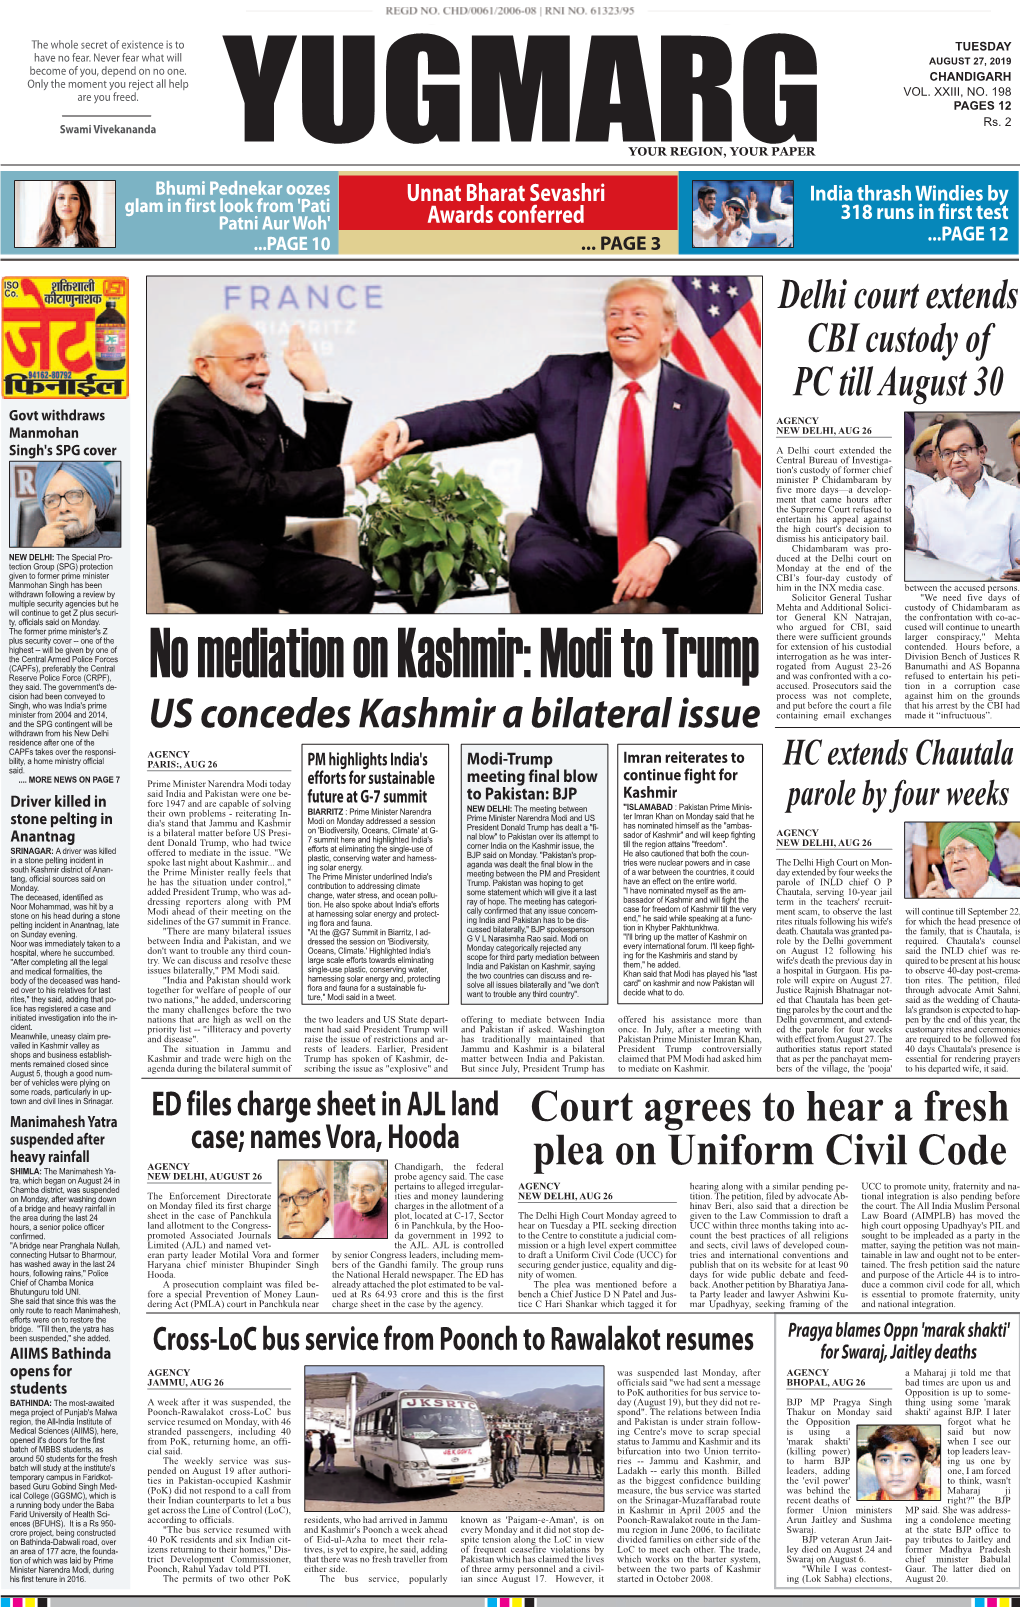 Modi to Trump and Was Confronted with a Co- Refused to Entertain His Peti- They Said